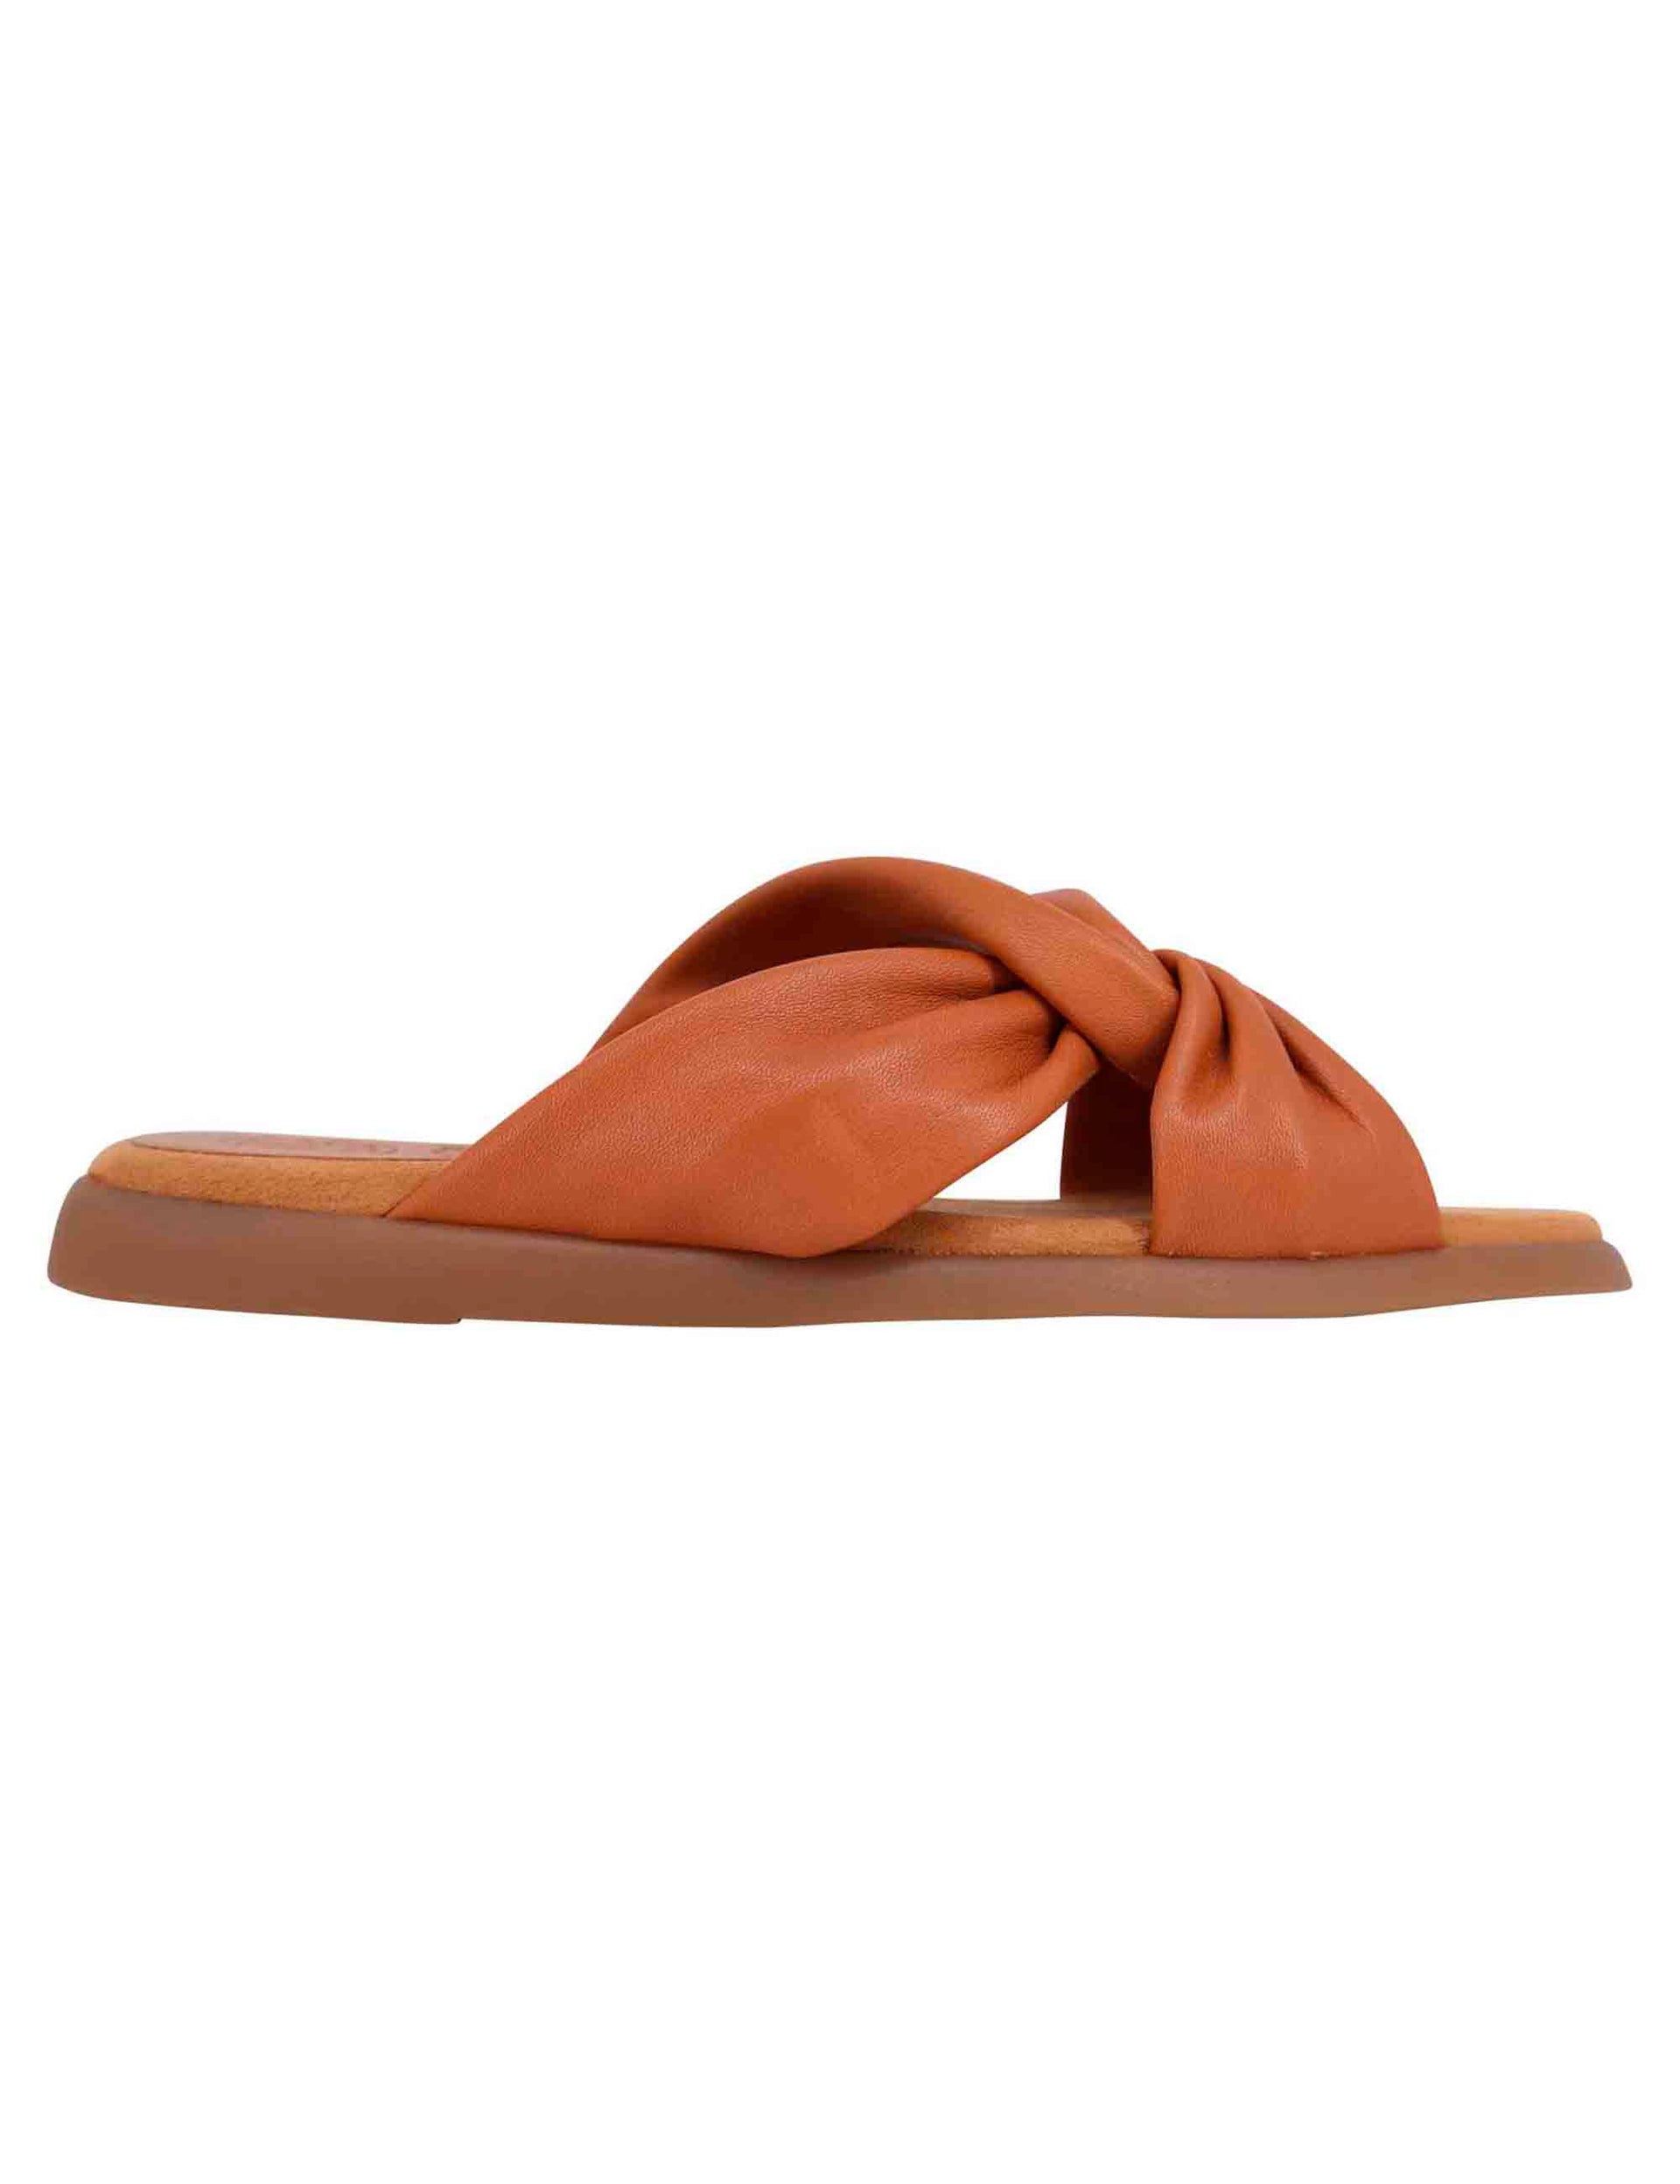 Women's flat sandals in tan leather with soft insole